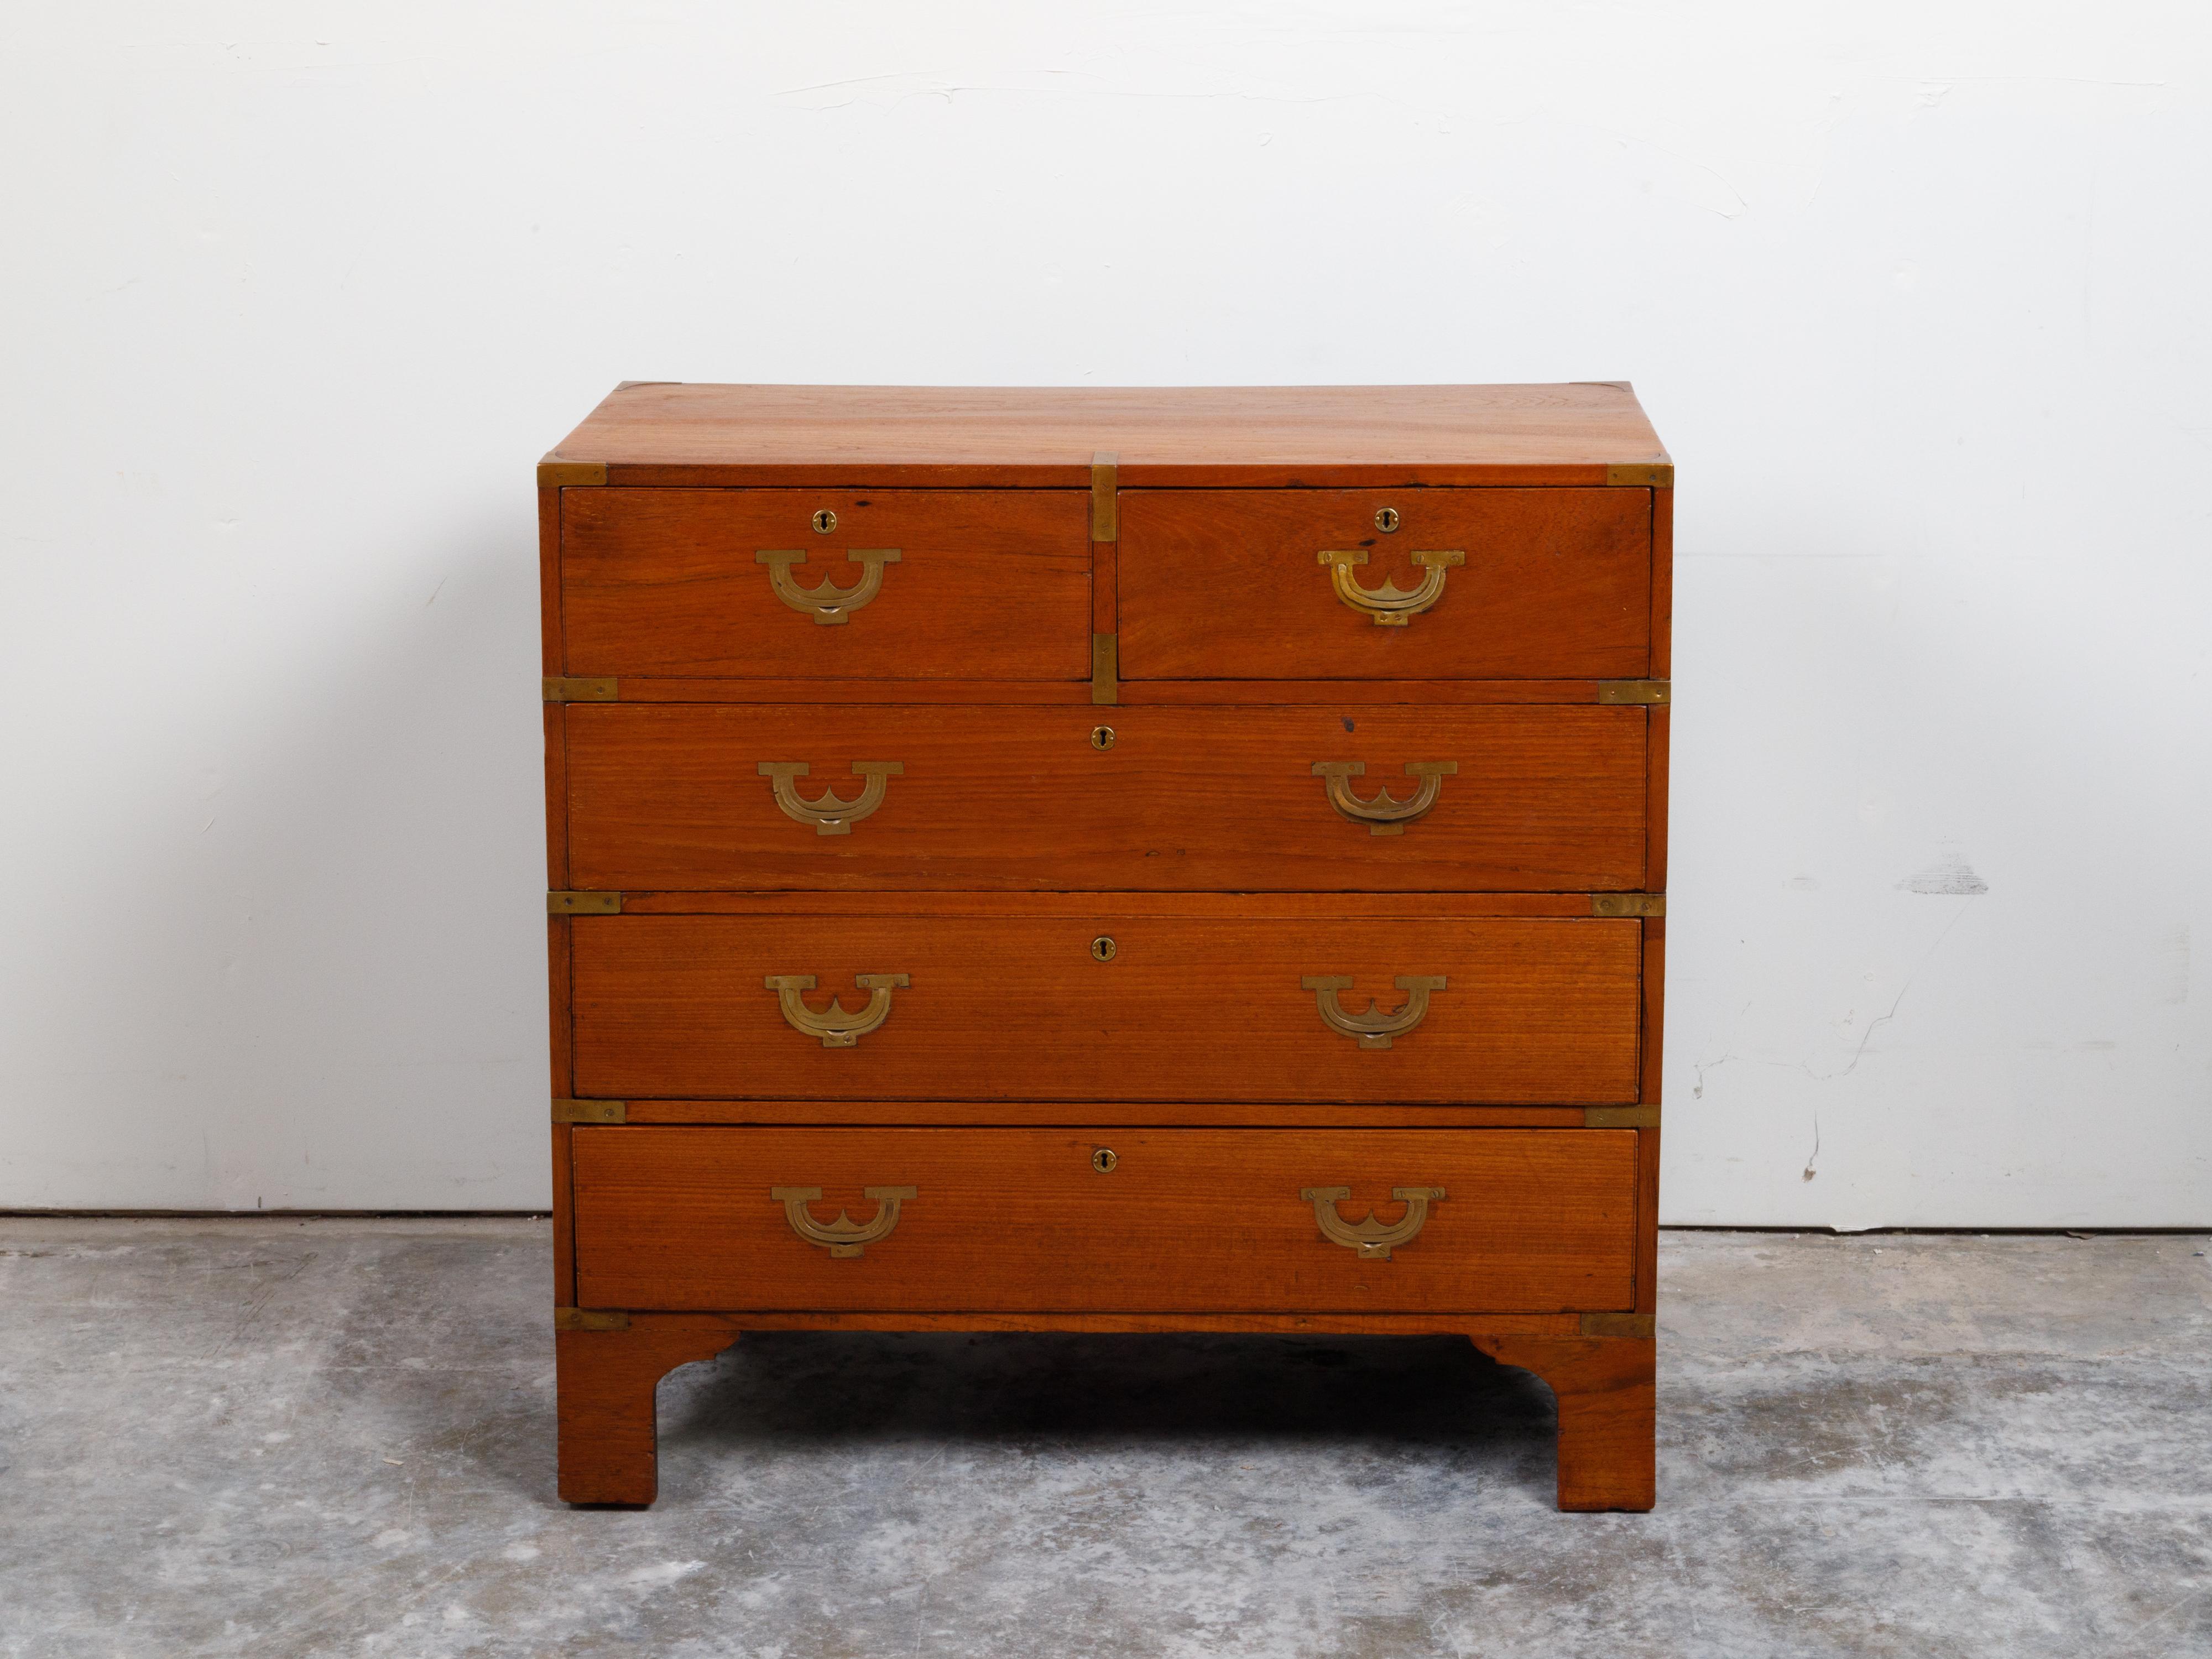 An English Campaign teak wood chest from the 19th century, with brass hardware and bracket feet. Created in England during the 19th century, this teak wood chest features a rectangular top with brass accents, sitting above two small dovetailed